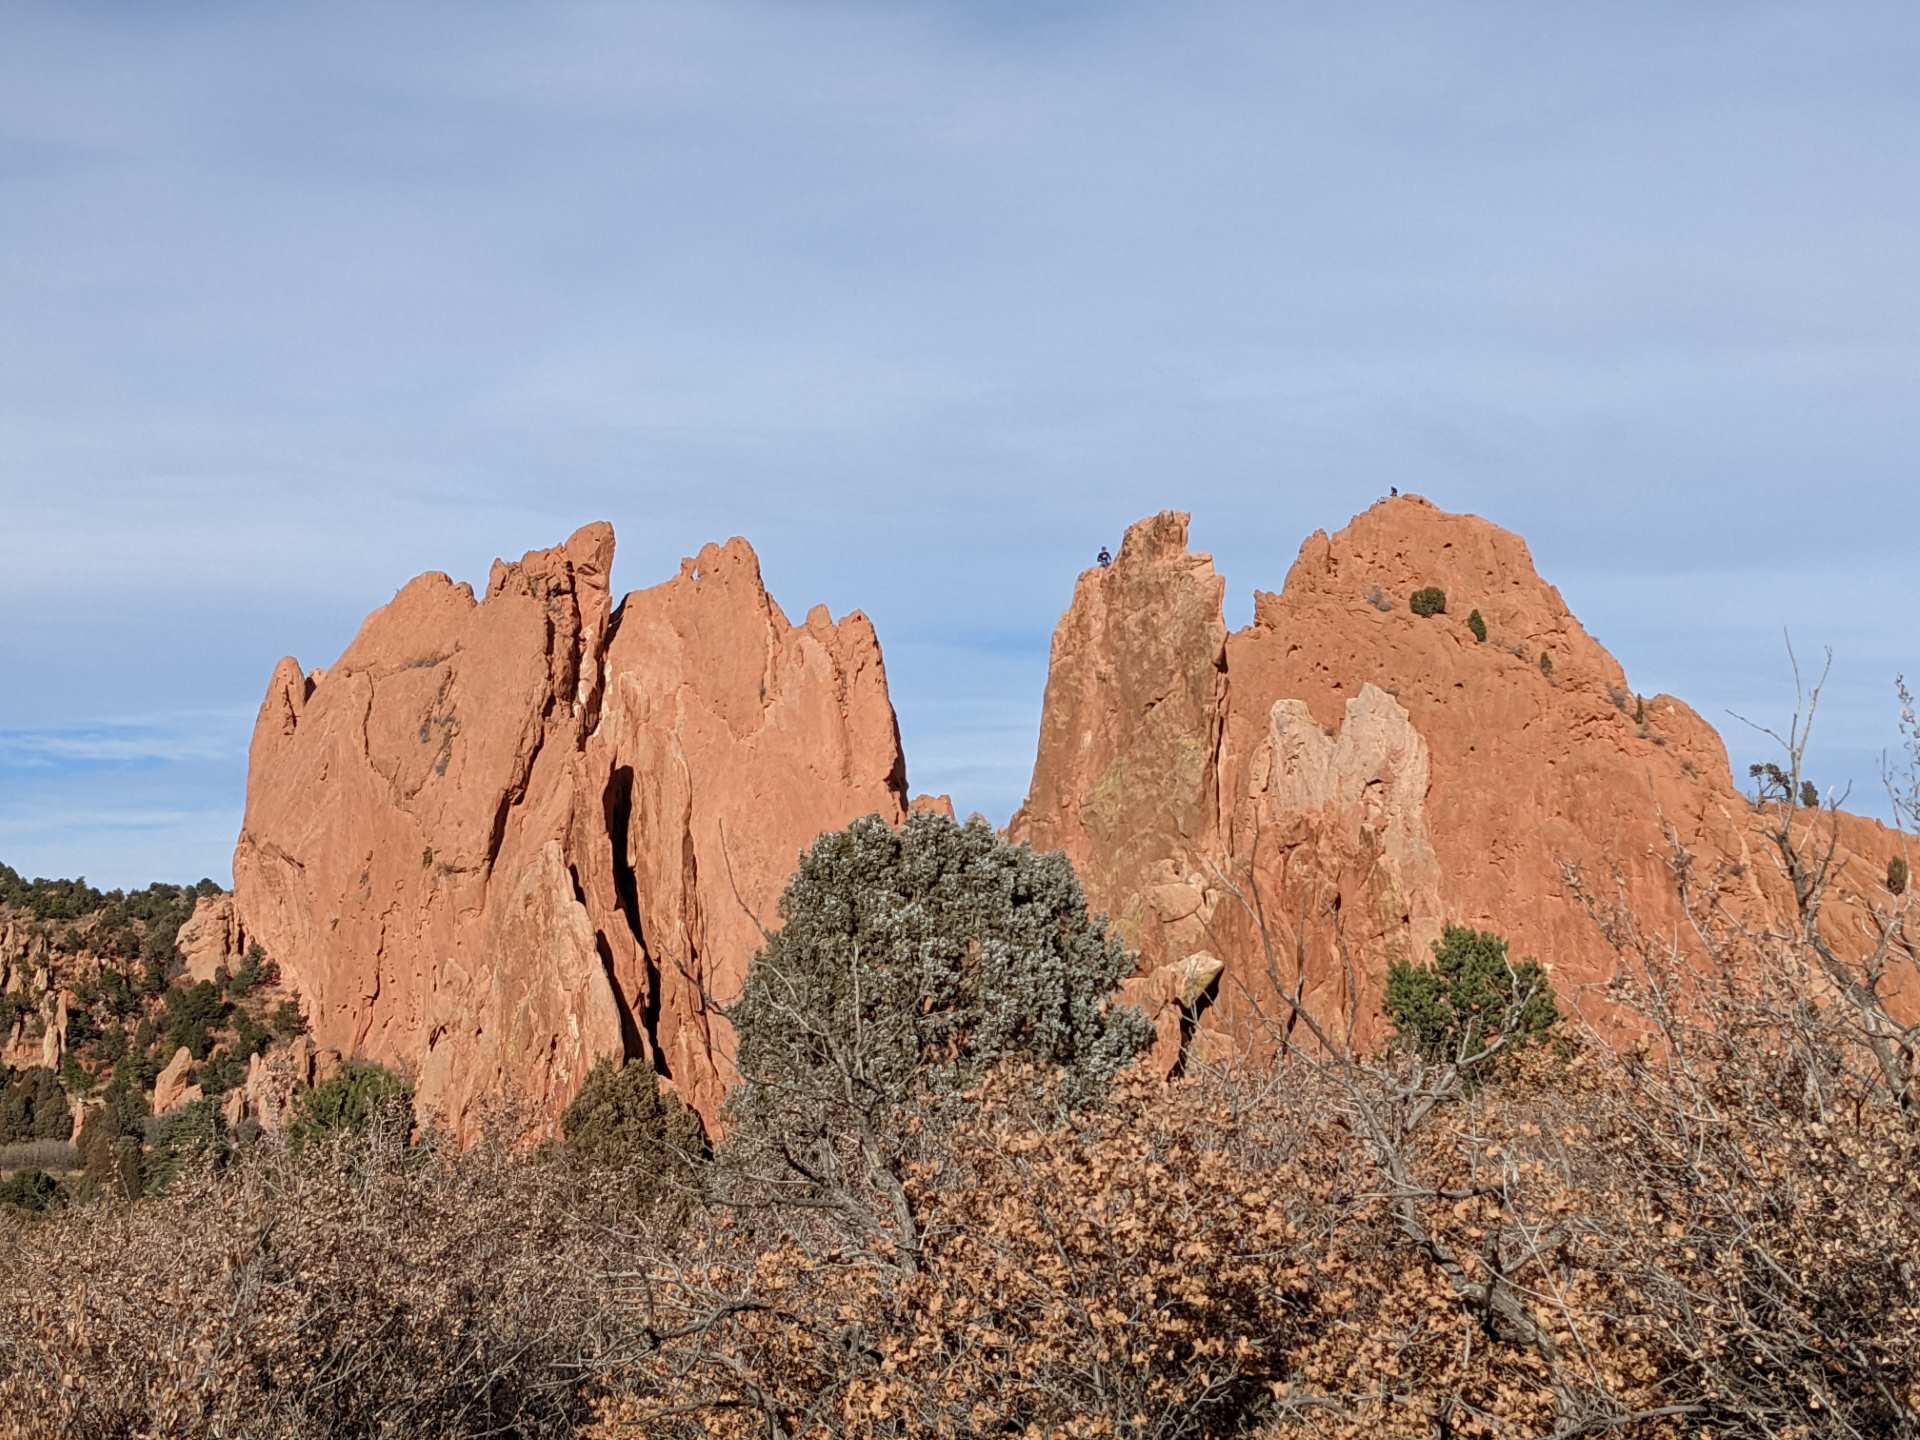 There were rock climbers on the Gateway Rocks at the Garden of the Gods.